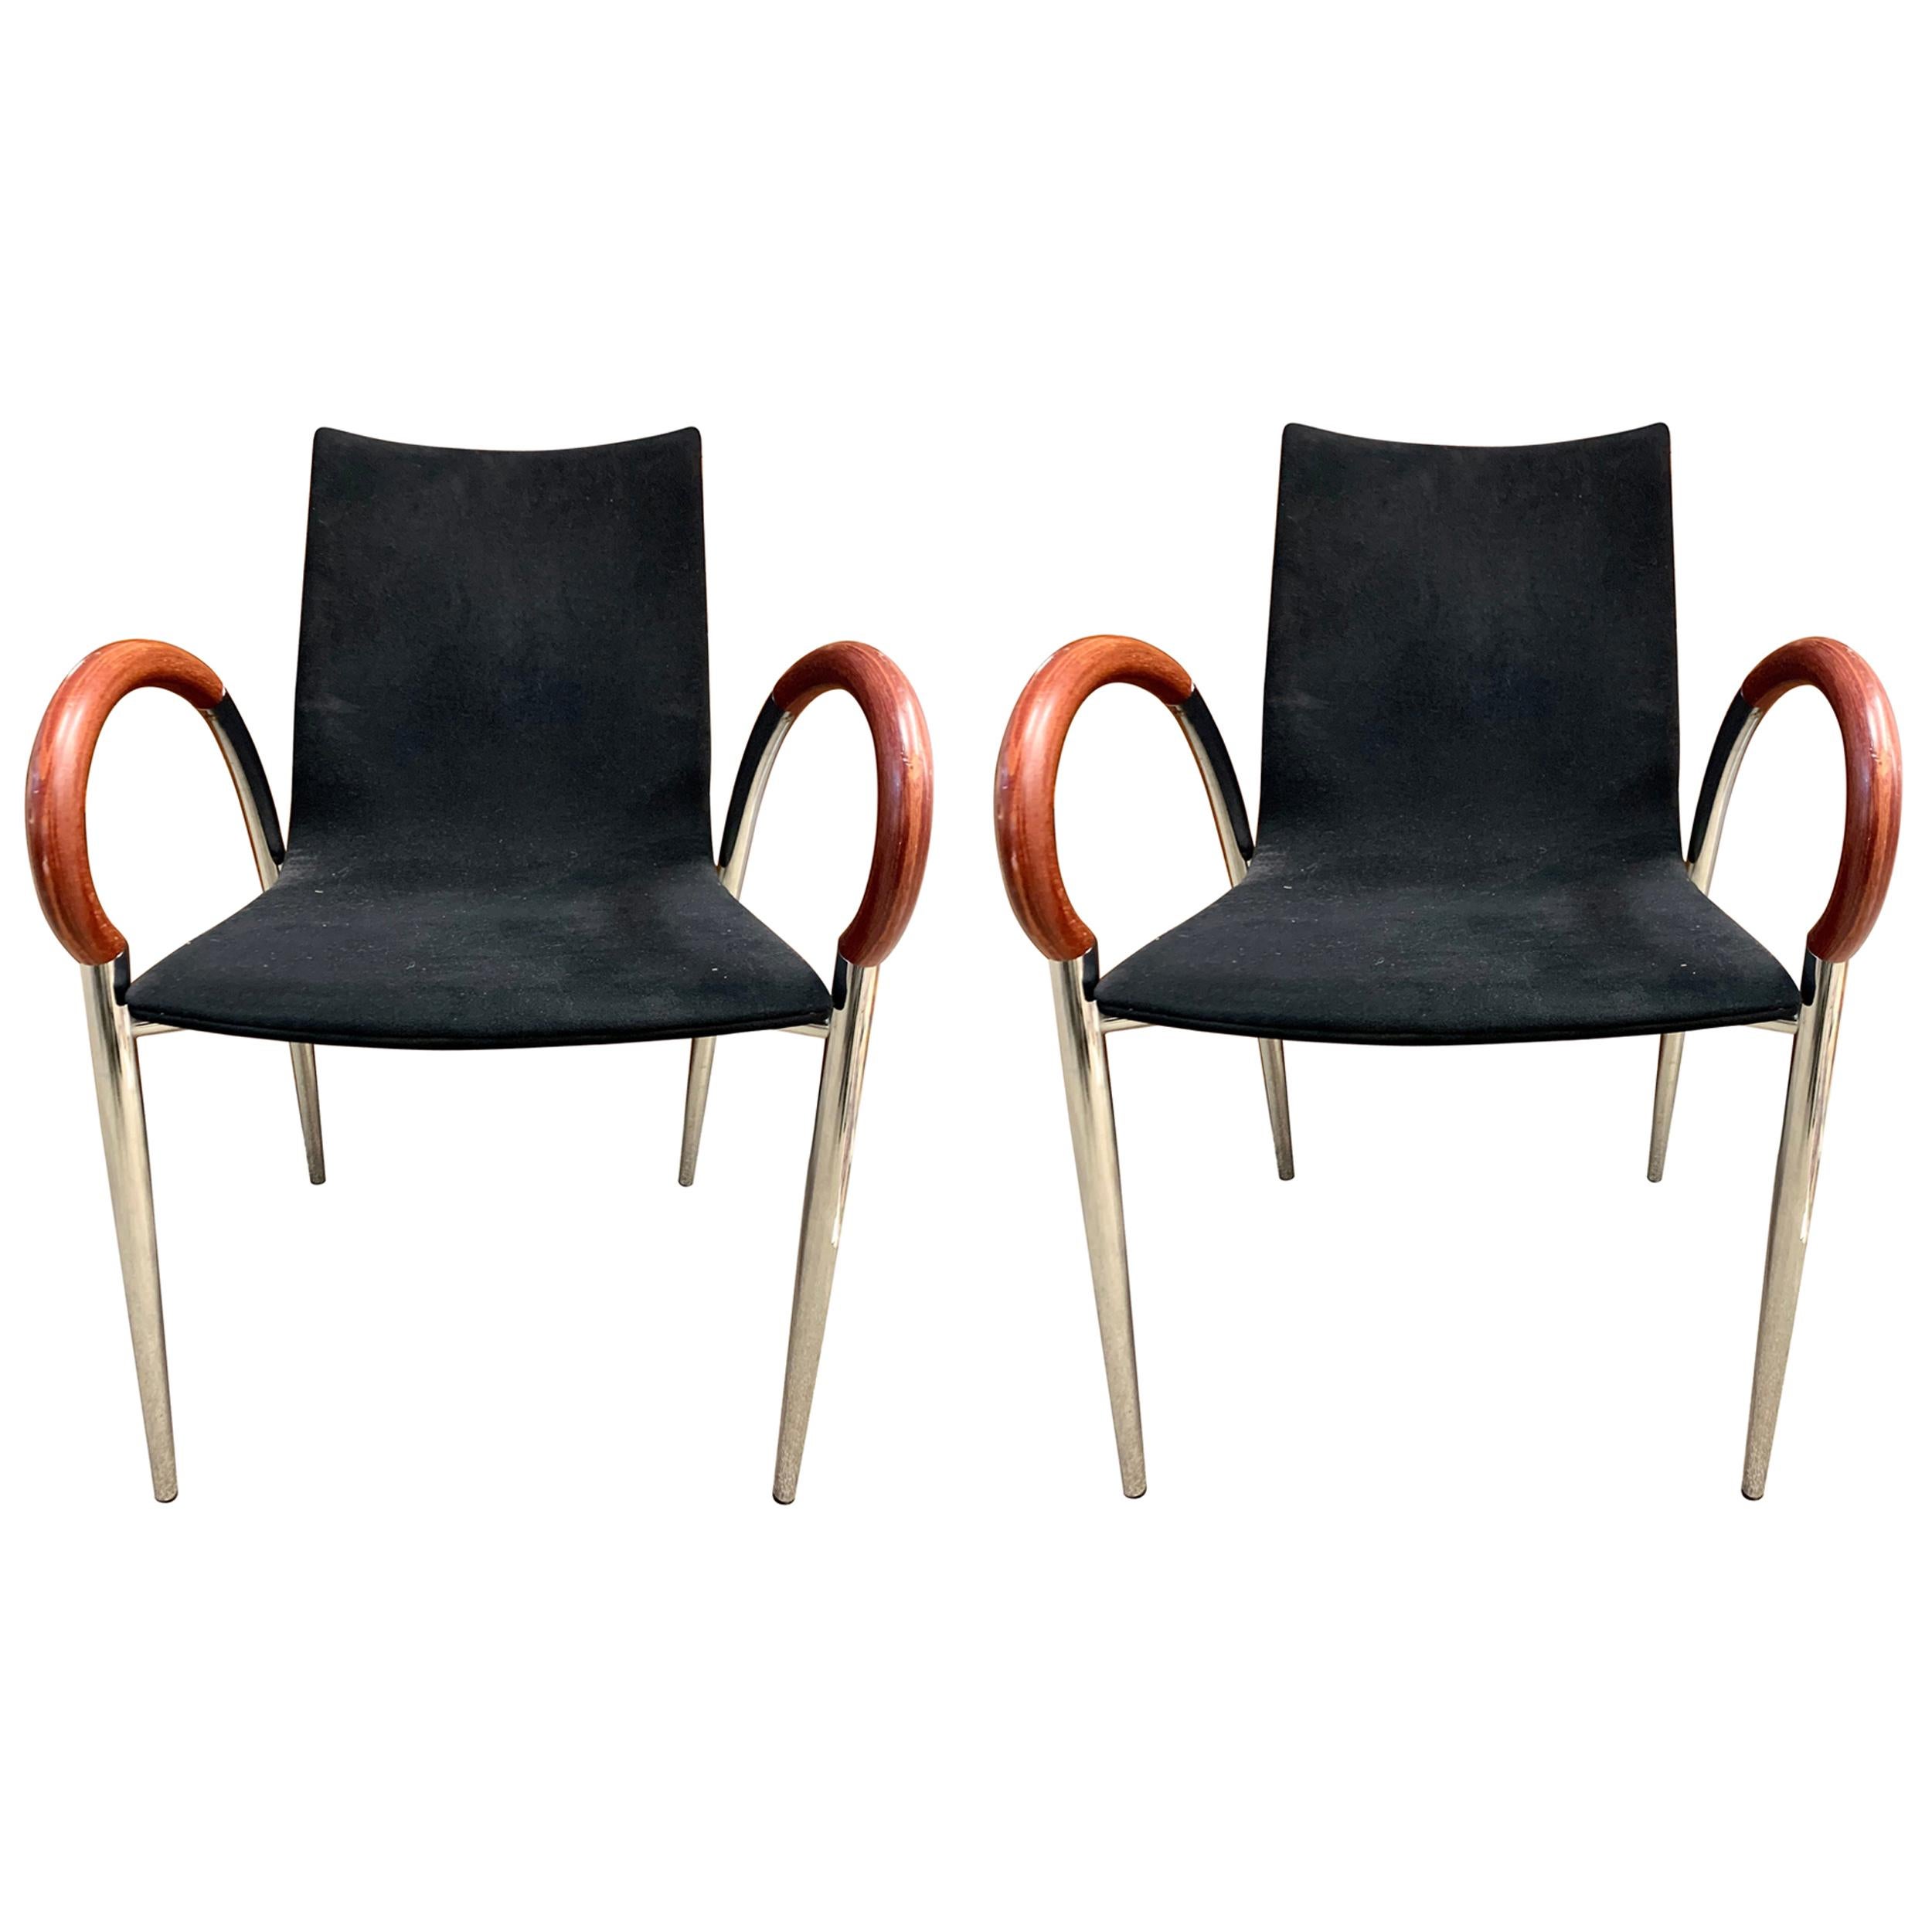 Pair of Mid-Century Modern Made in Italy Dining Chairs